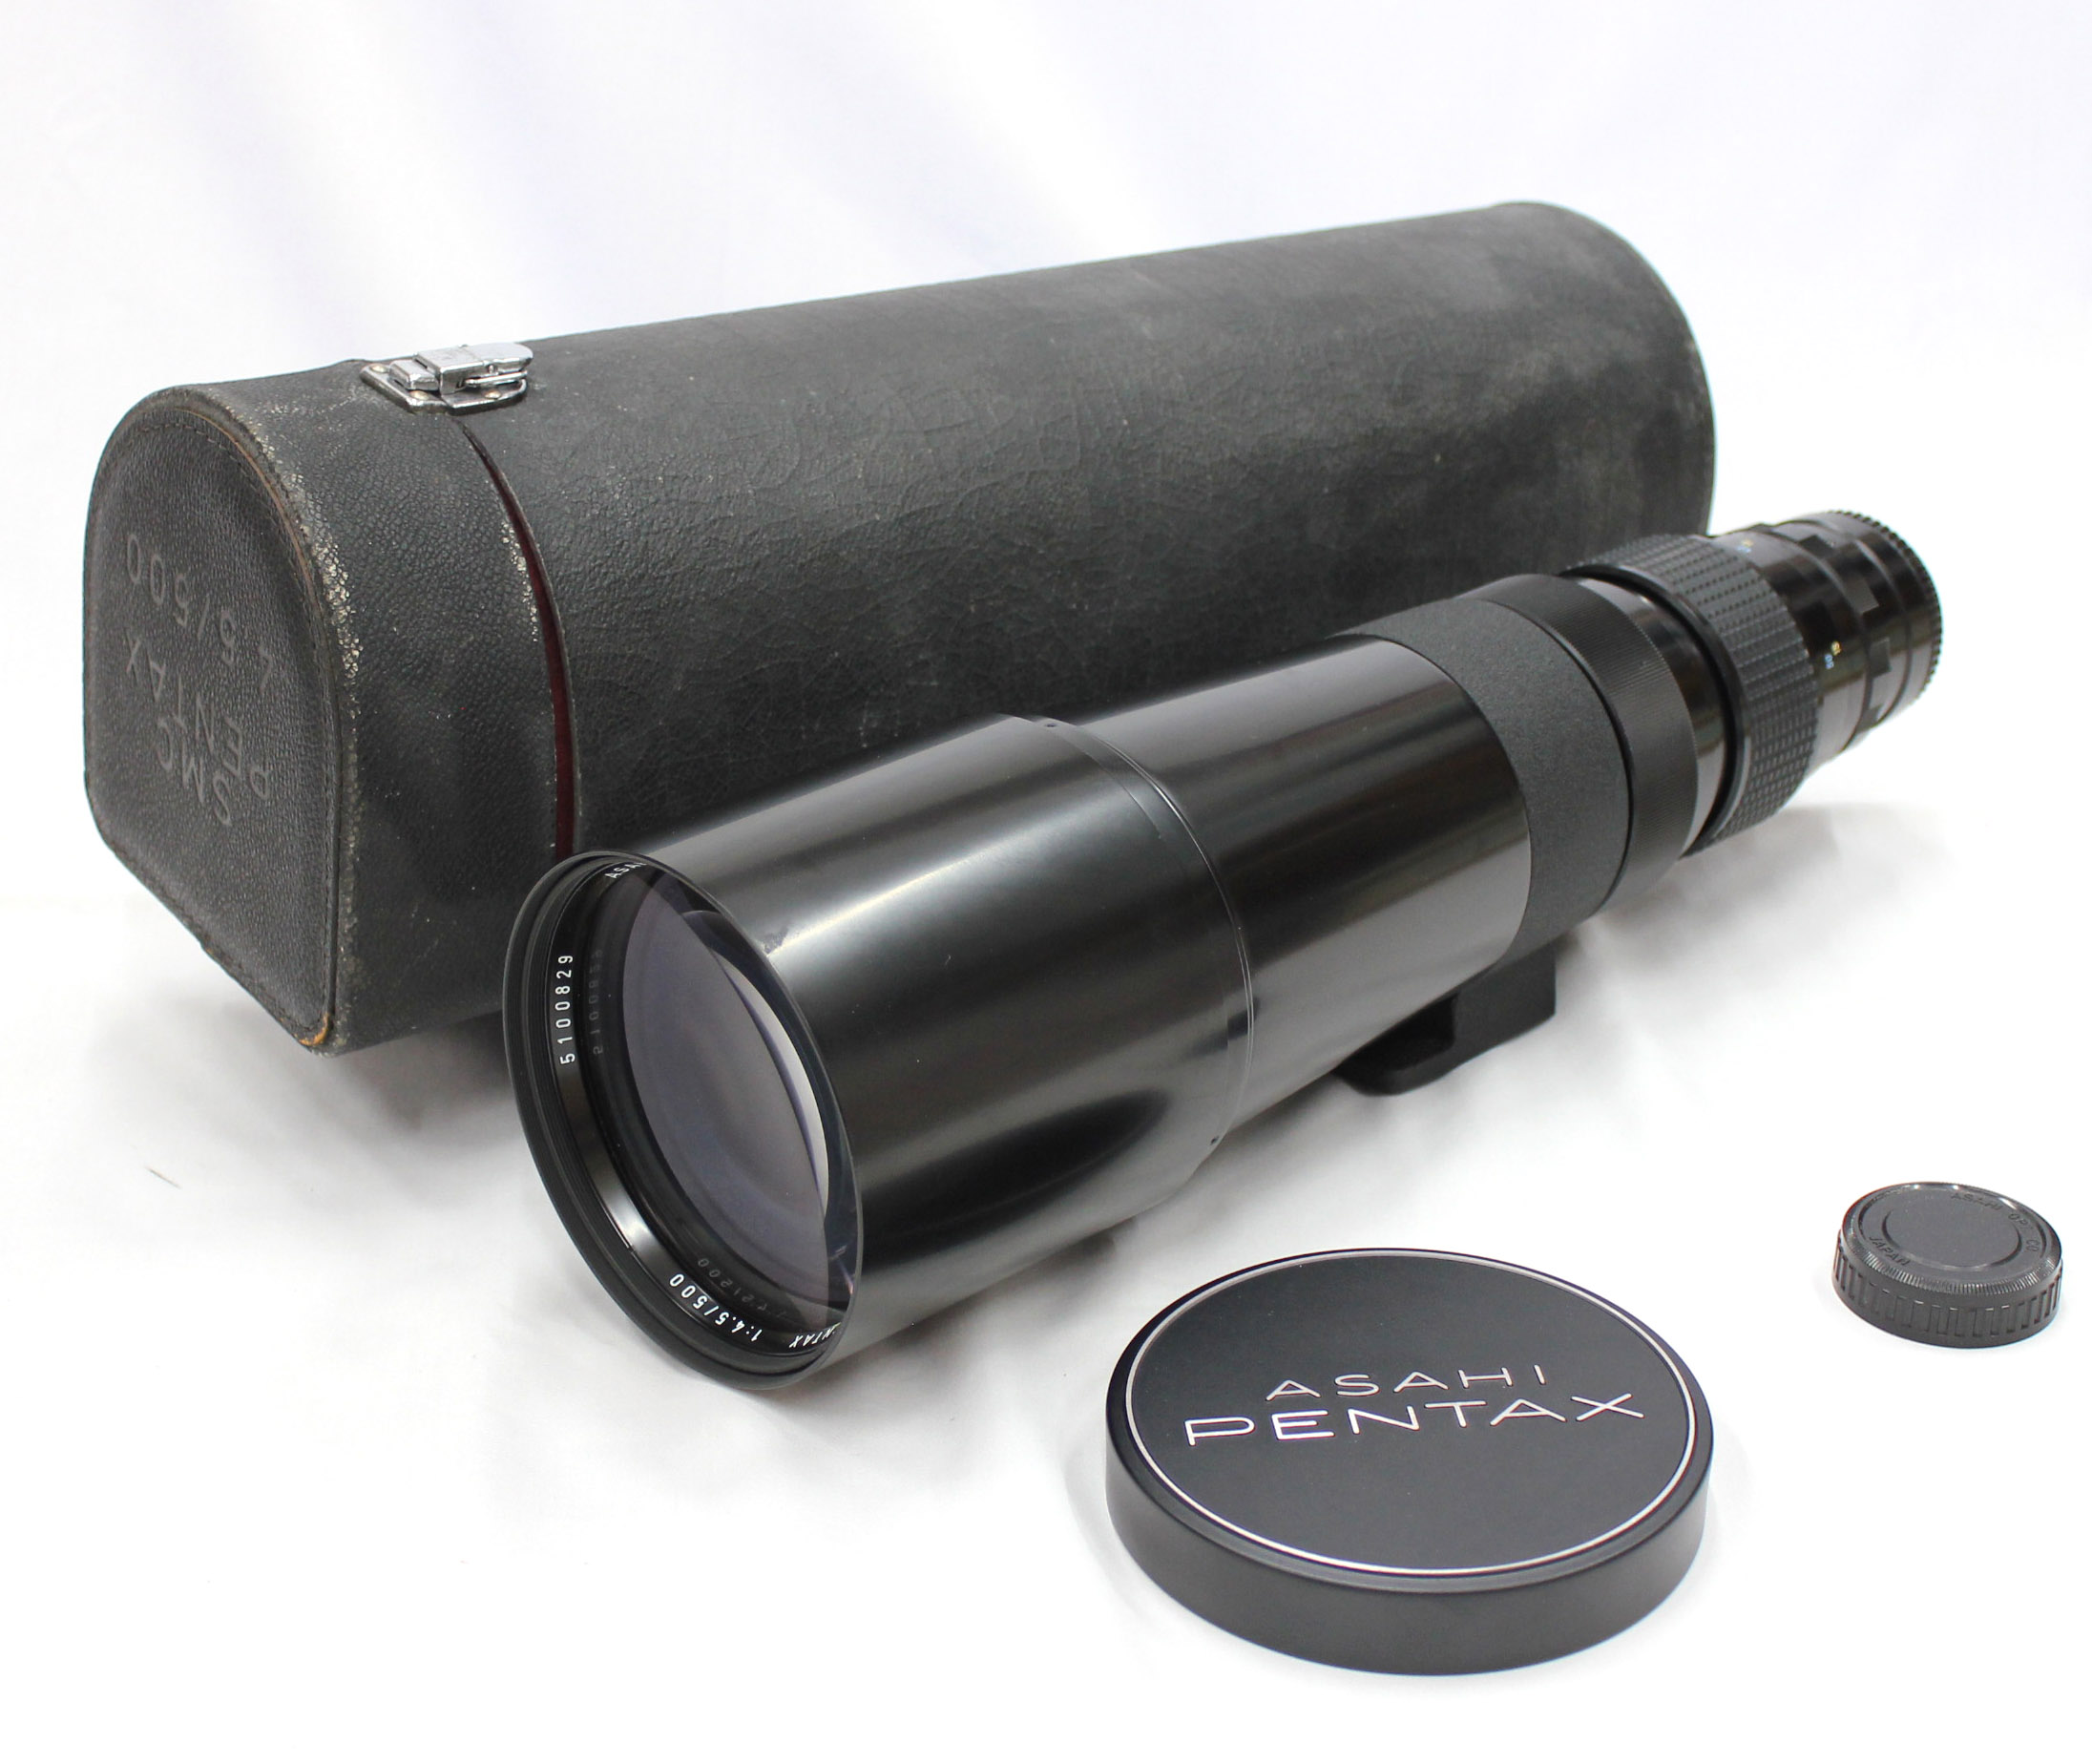 Japan Used Camera Shop | [Near Mint] SMC Pentax 500mm F/4.5 Telephoto MF Lens for K Mount from Japan